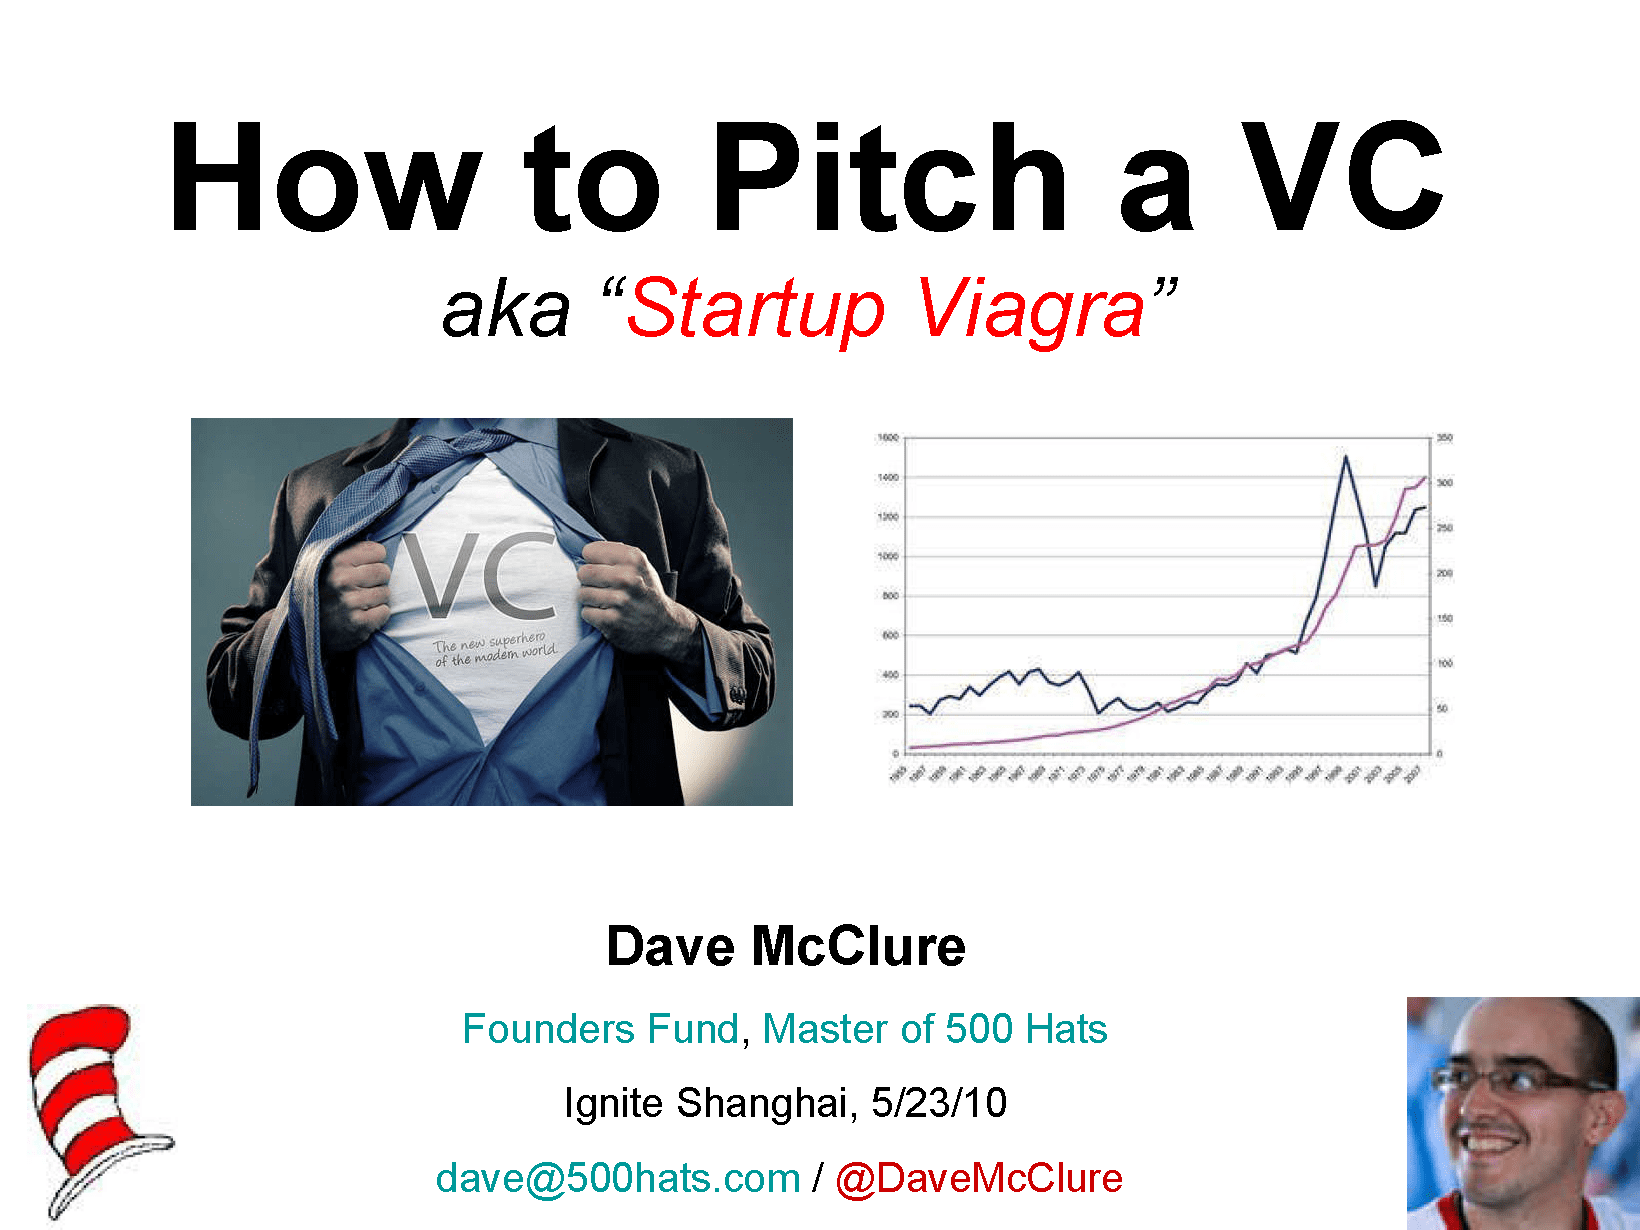 How to pitch a vc your startup when fundraising